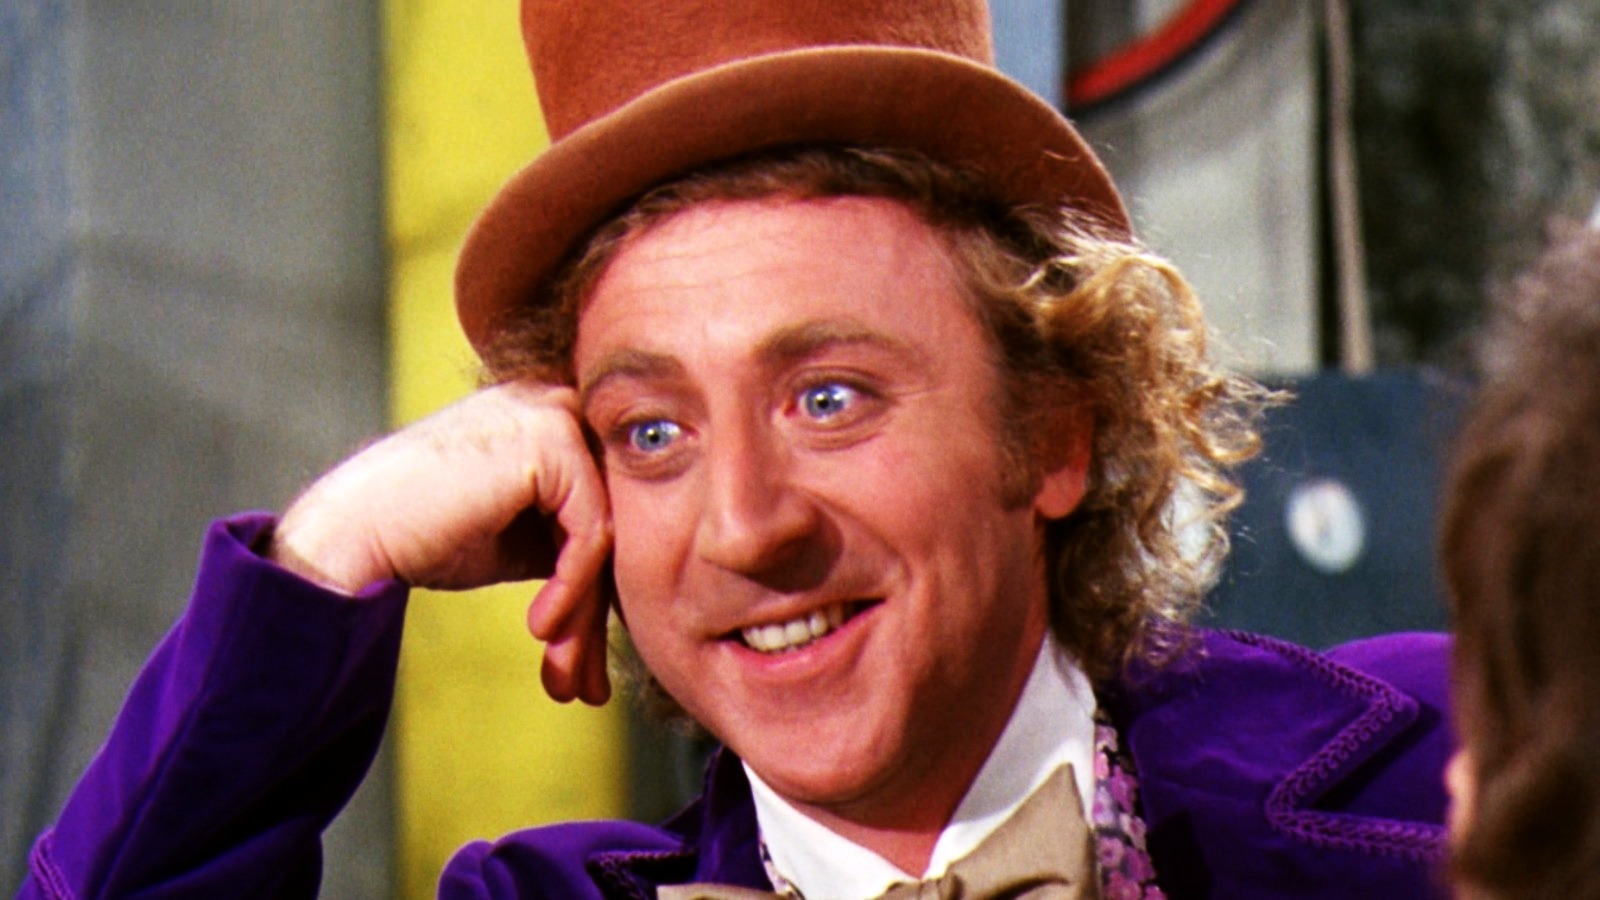 Willy Wonka' is a lot creepier 45 years later